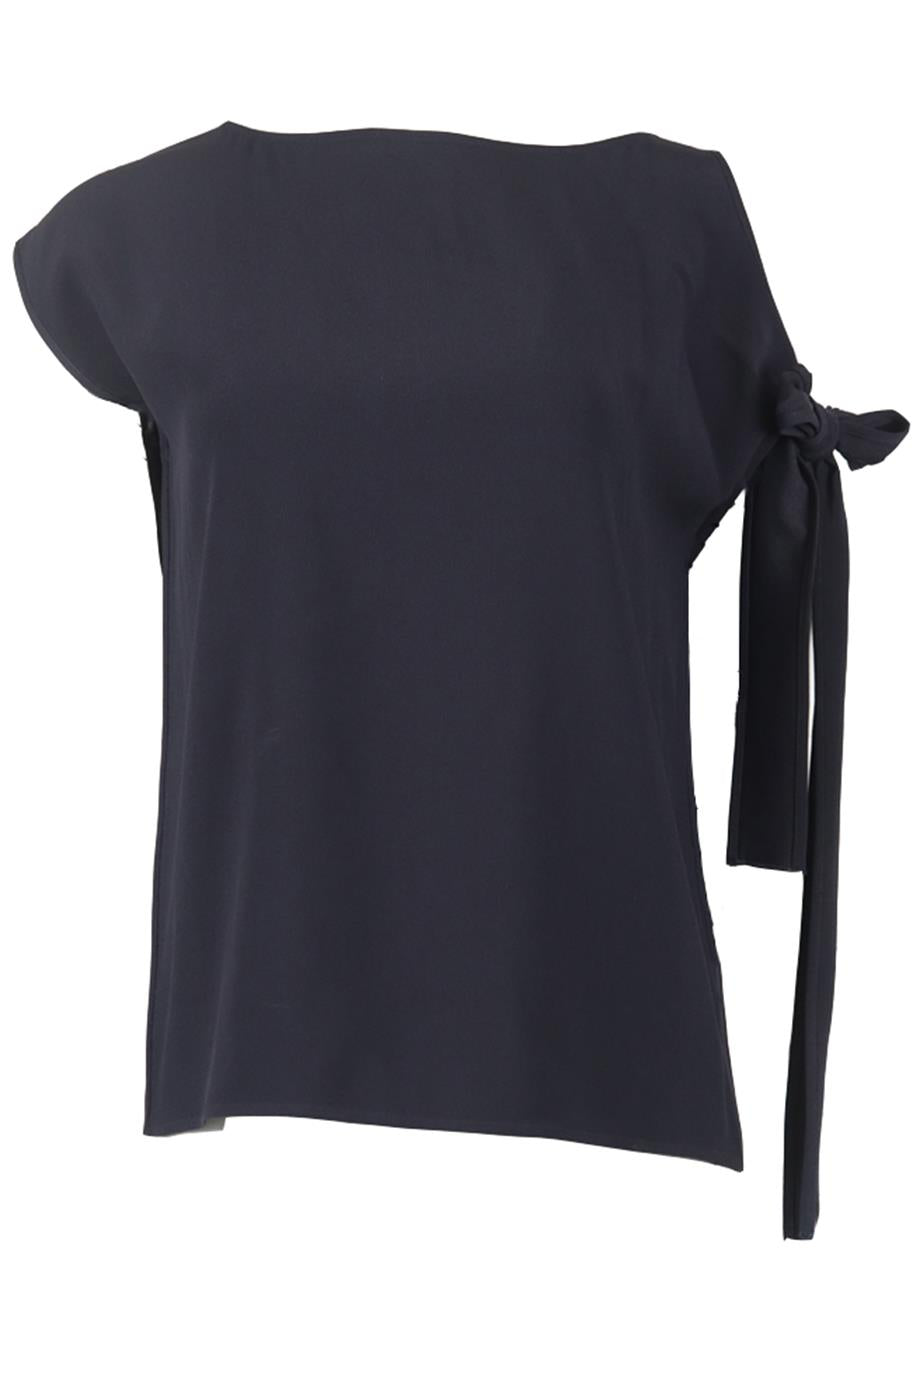 HELMUT LANG CREPE TOP SMALL